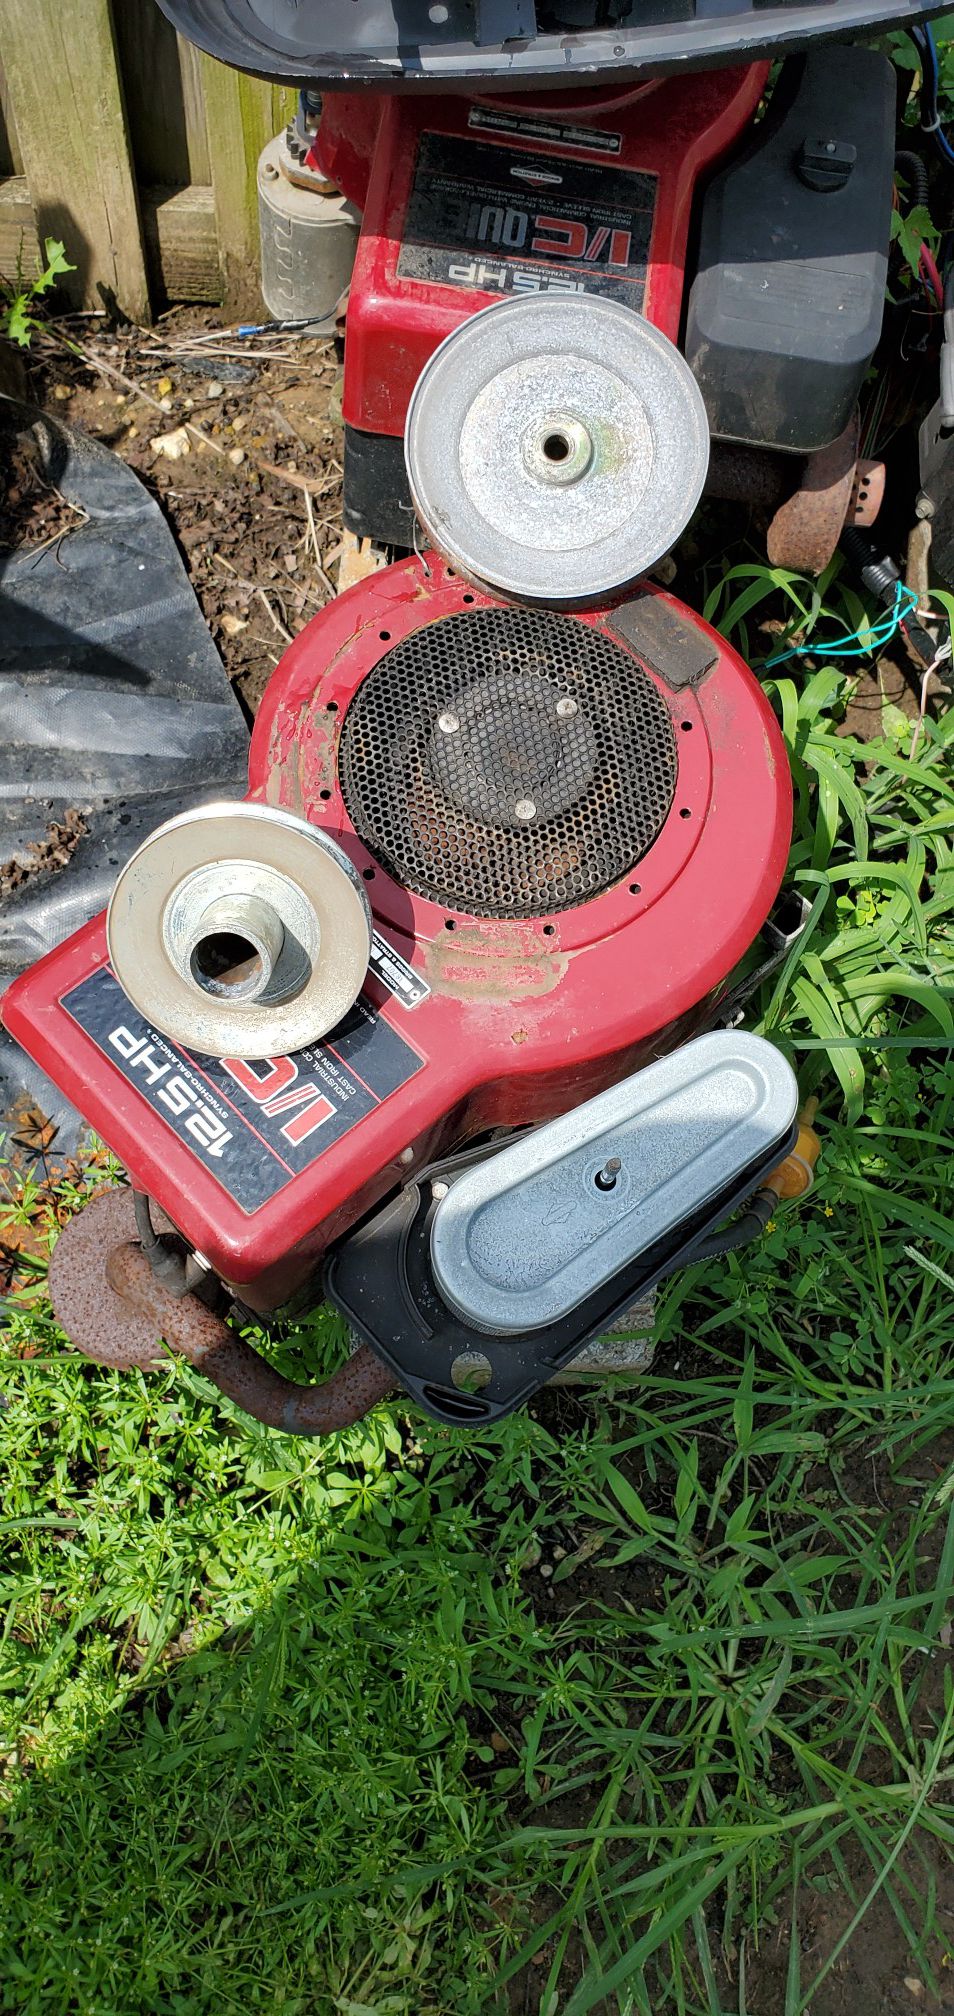 Briggs and stratton motor $100 each